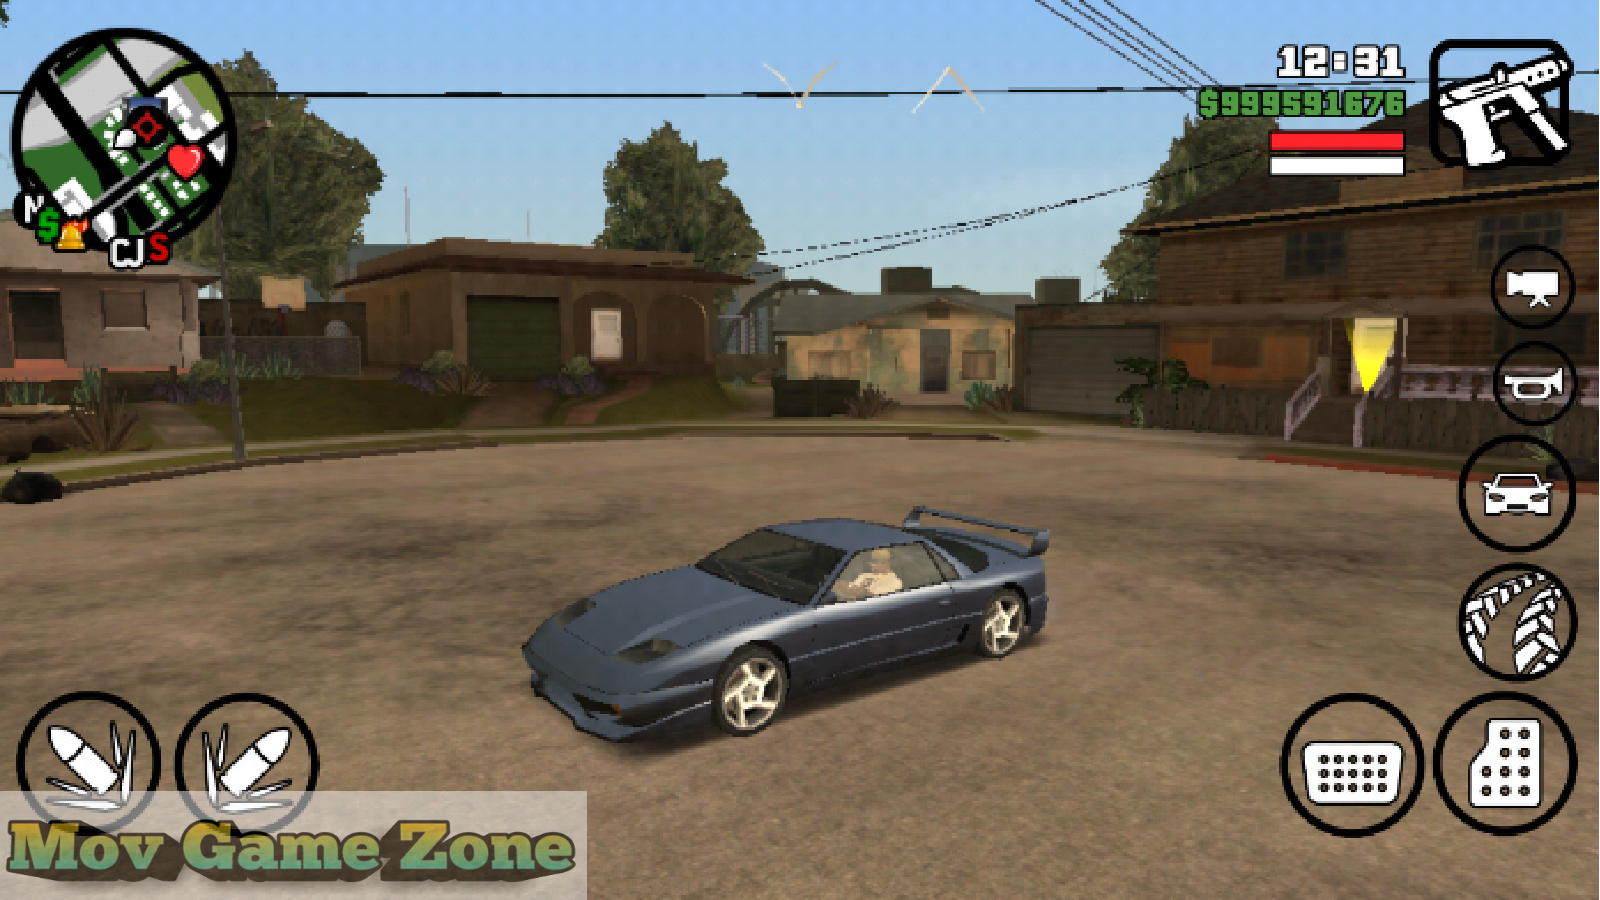 Gta San Andreas Cheats For Ppsspp - cleverlook